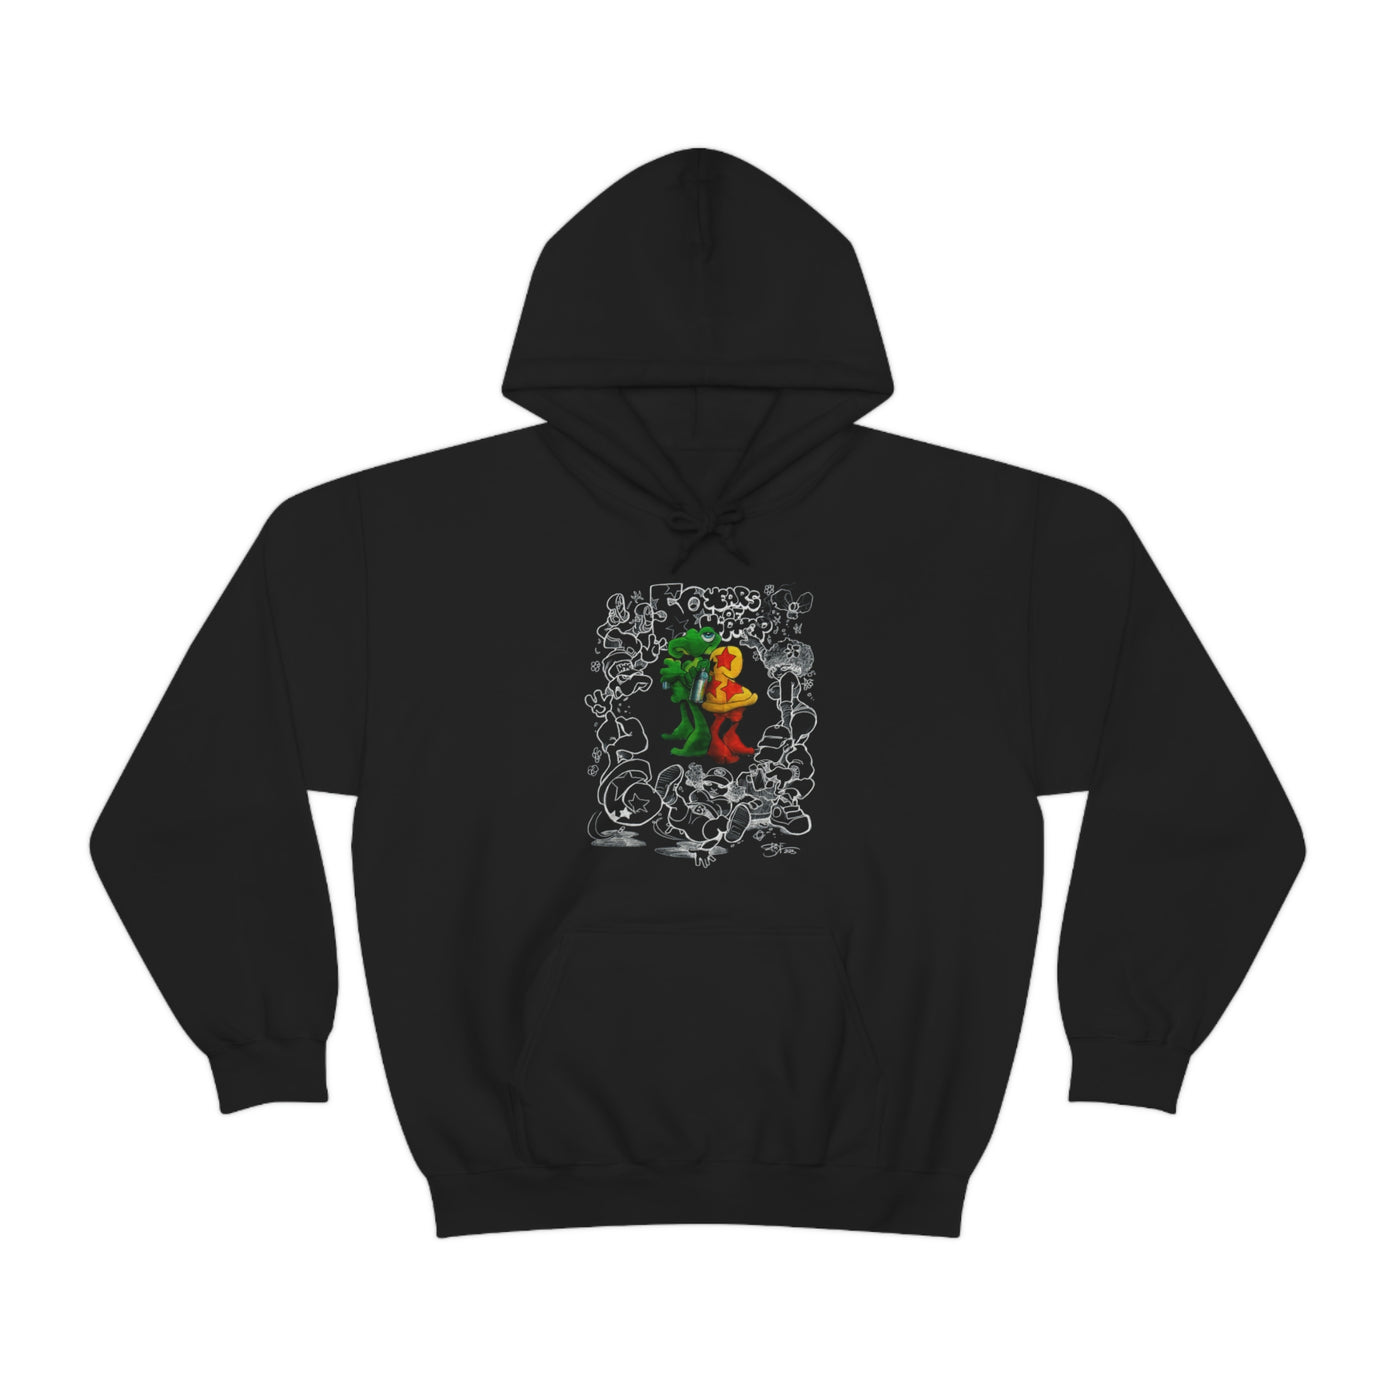 Bode X 50th Anniversary of Hip Hop Limited Edition 2-Sided Hoodie Black